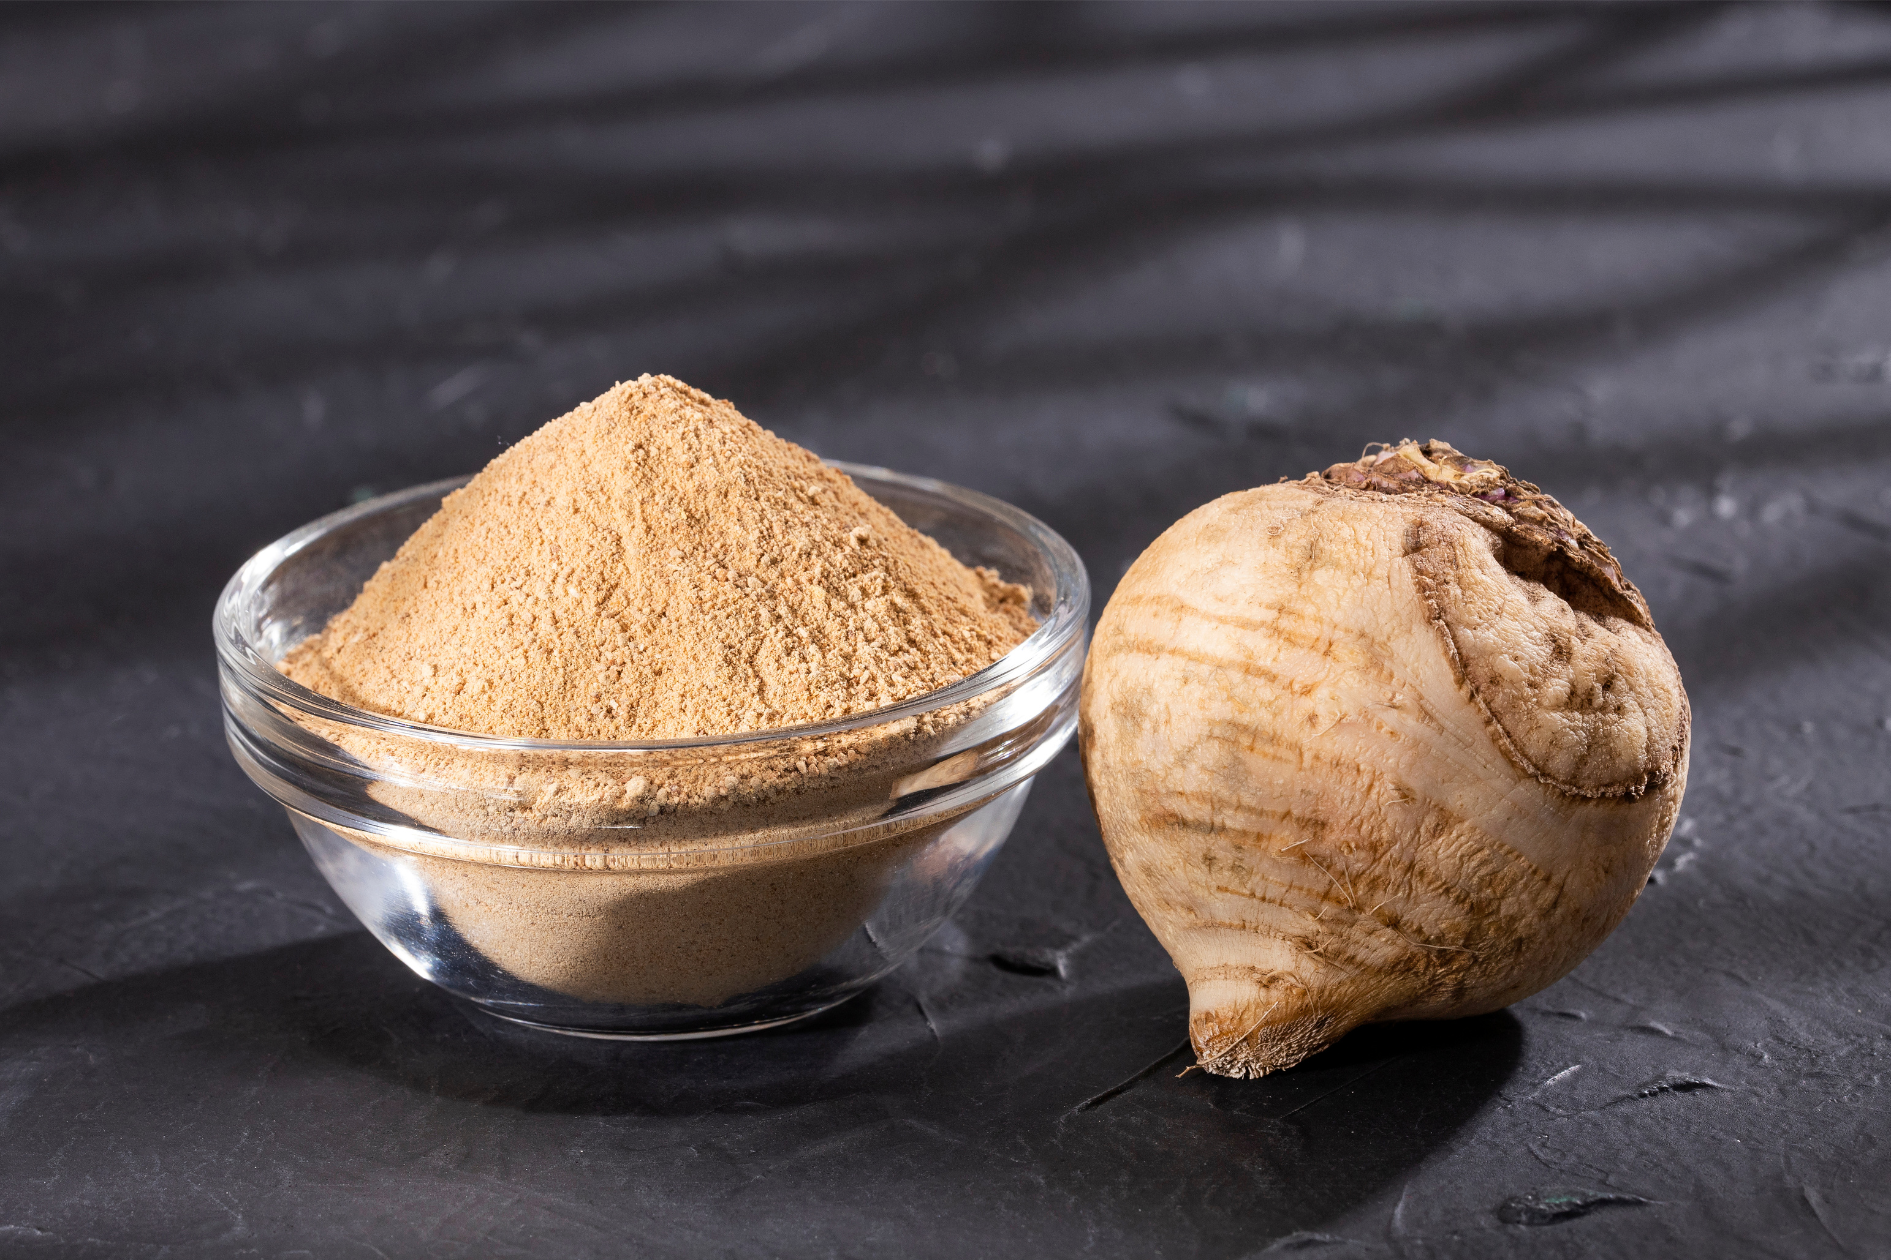 Glass bowl filled with maca root powder beside a whole maca root on a dark, textured background.